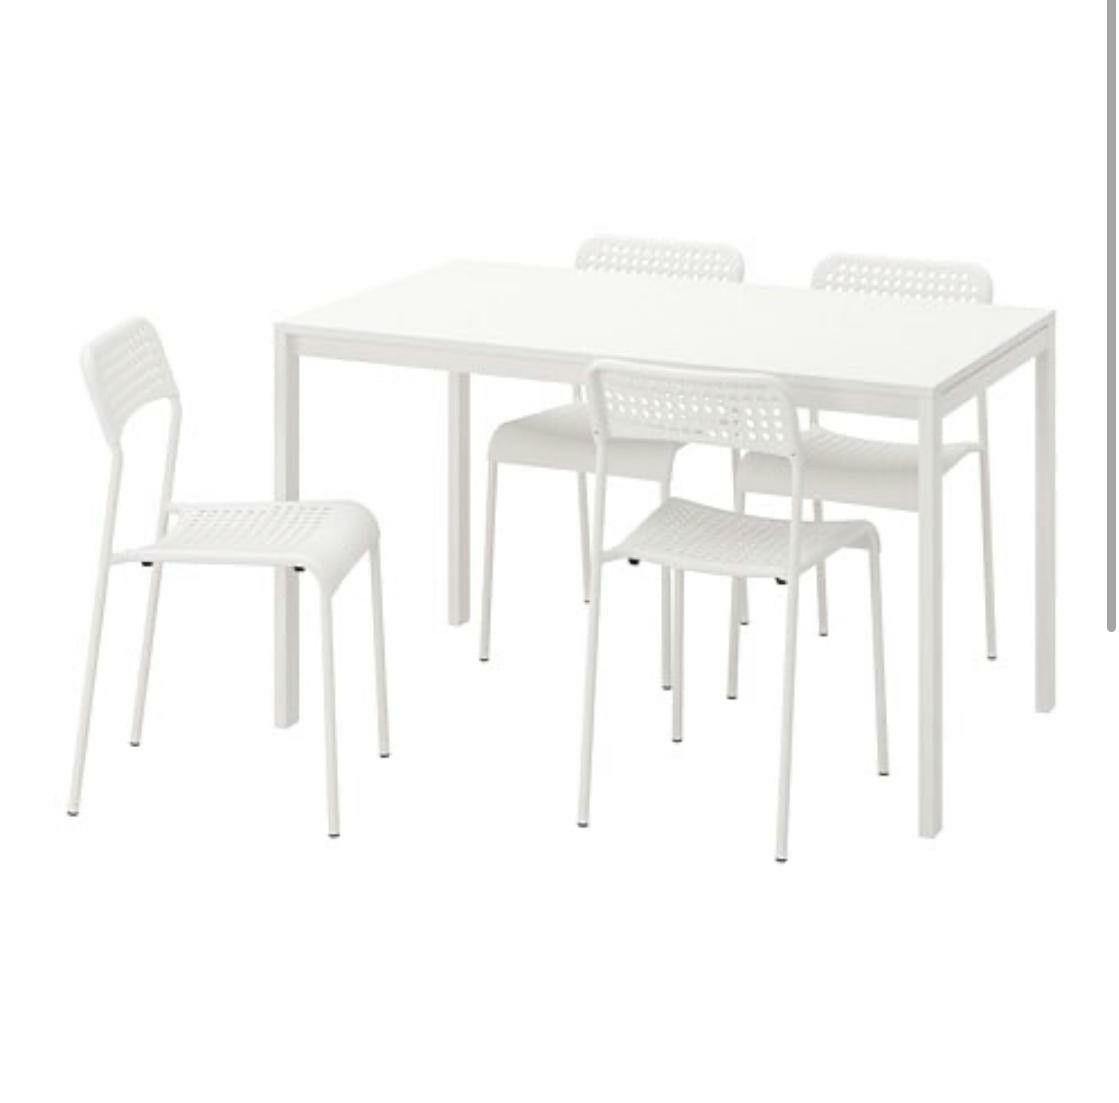 5 piece Dining table set White table and 4 chairs kitchen furniture